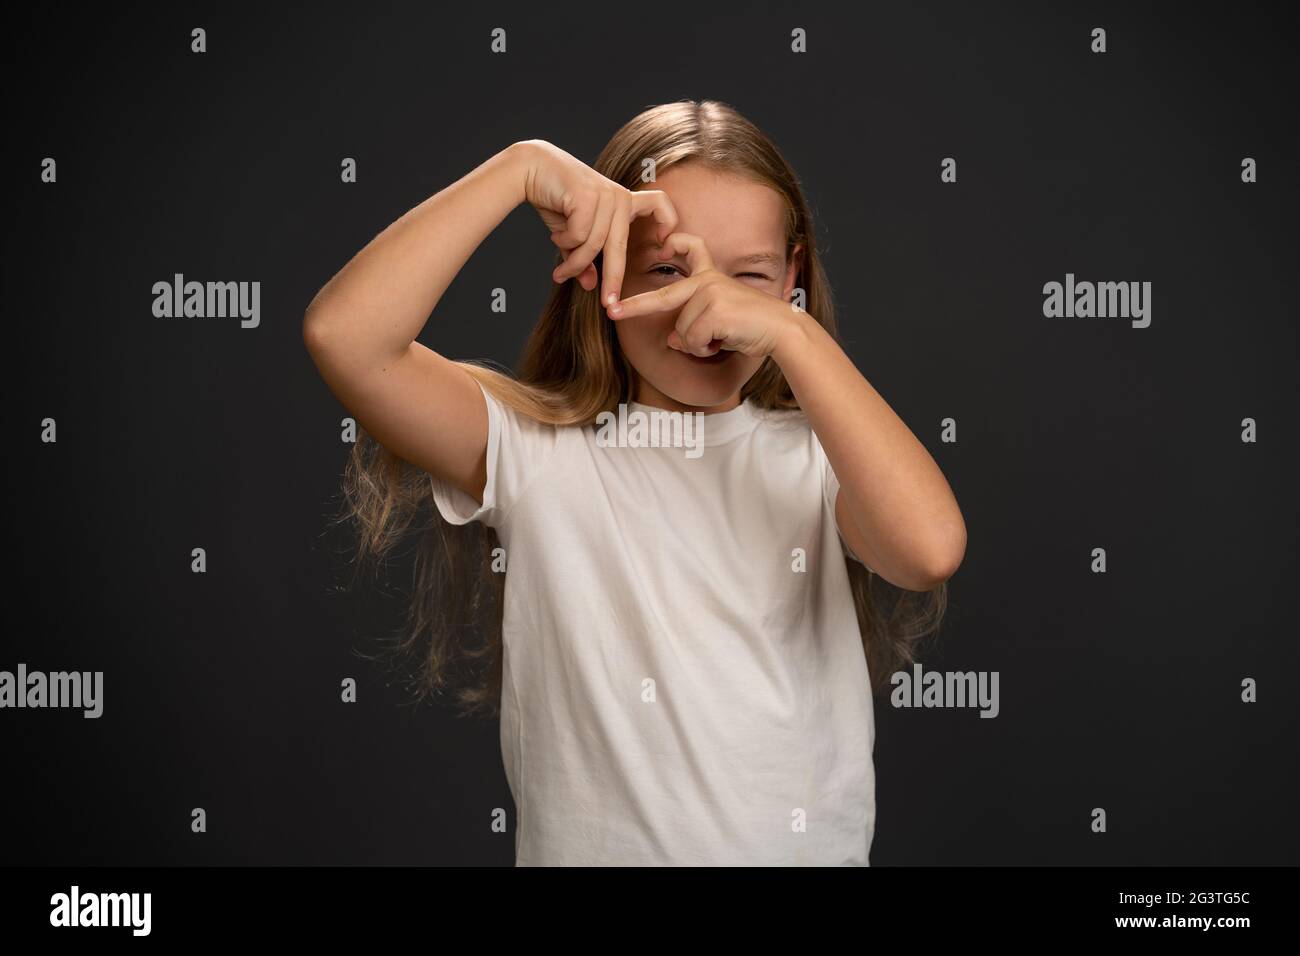 Love gesture happy 8,10 years old girl holding her hands together making a heart shape and looking thru it wearing white t shirt Stock Photo